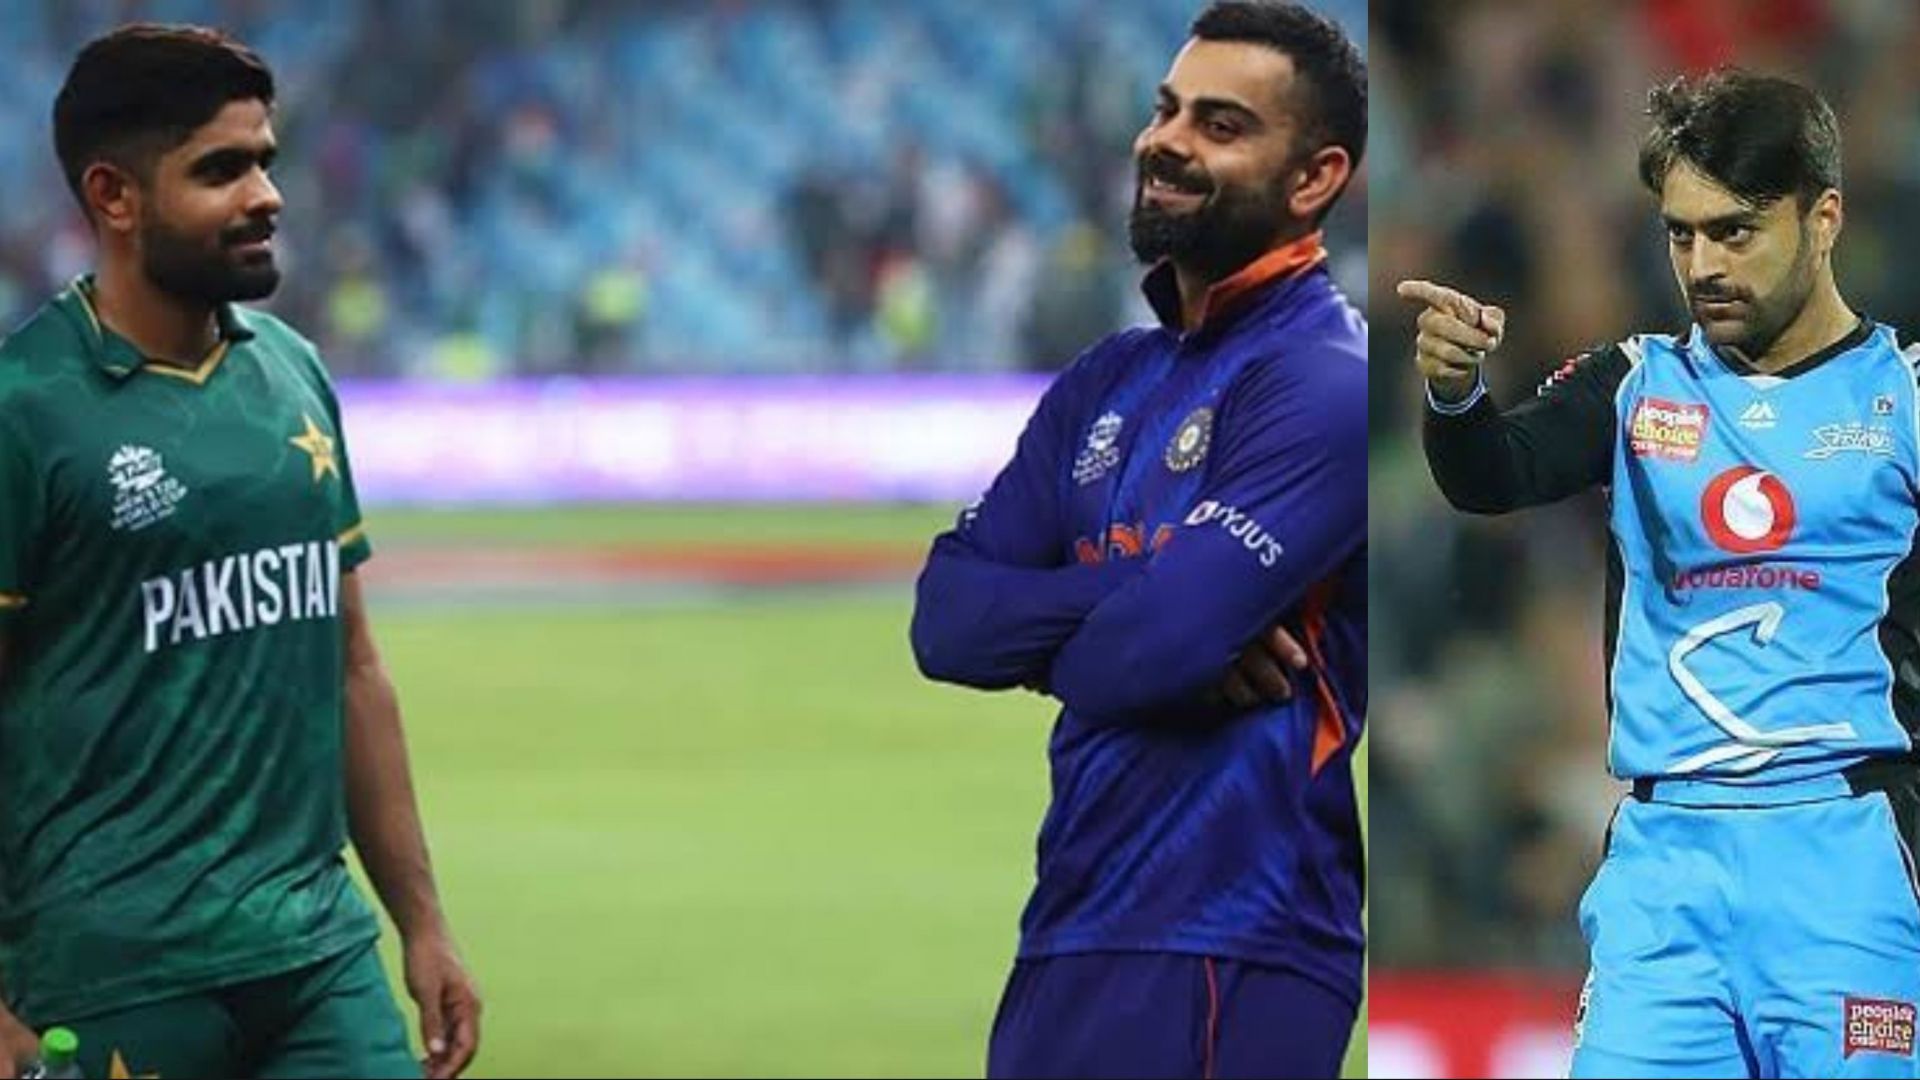 Virat Kohli, Babar Azam, and Rashid Khan could play for the same team in the Afro-Asia Cup 2023